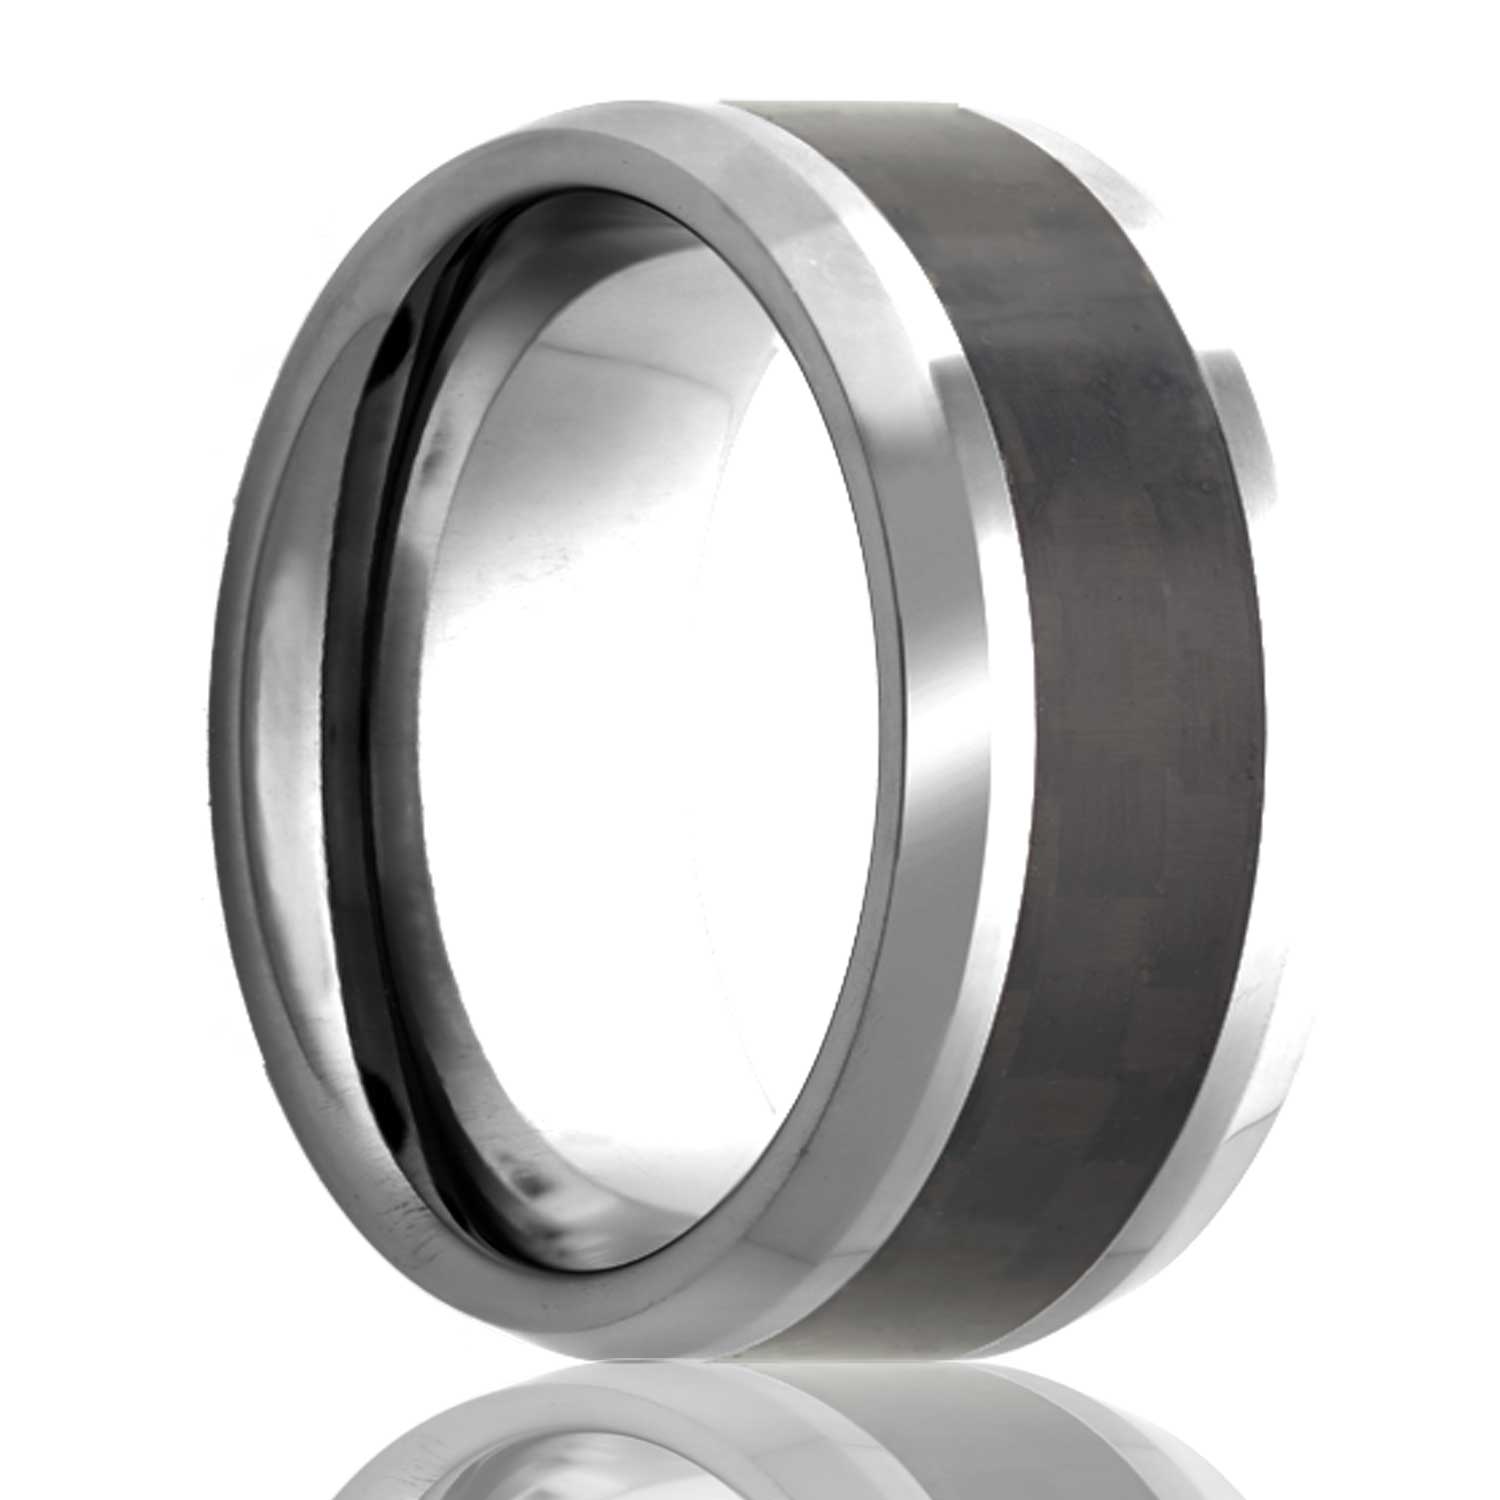 A carbon fiber inlay cobalt men's wedding band with beveled edges displayed on a neutral white background.